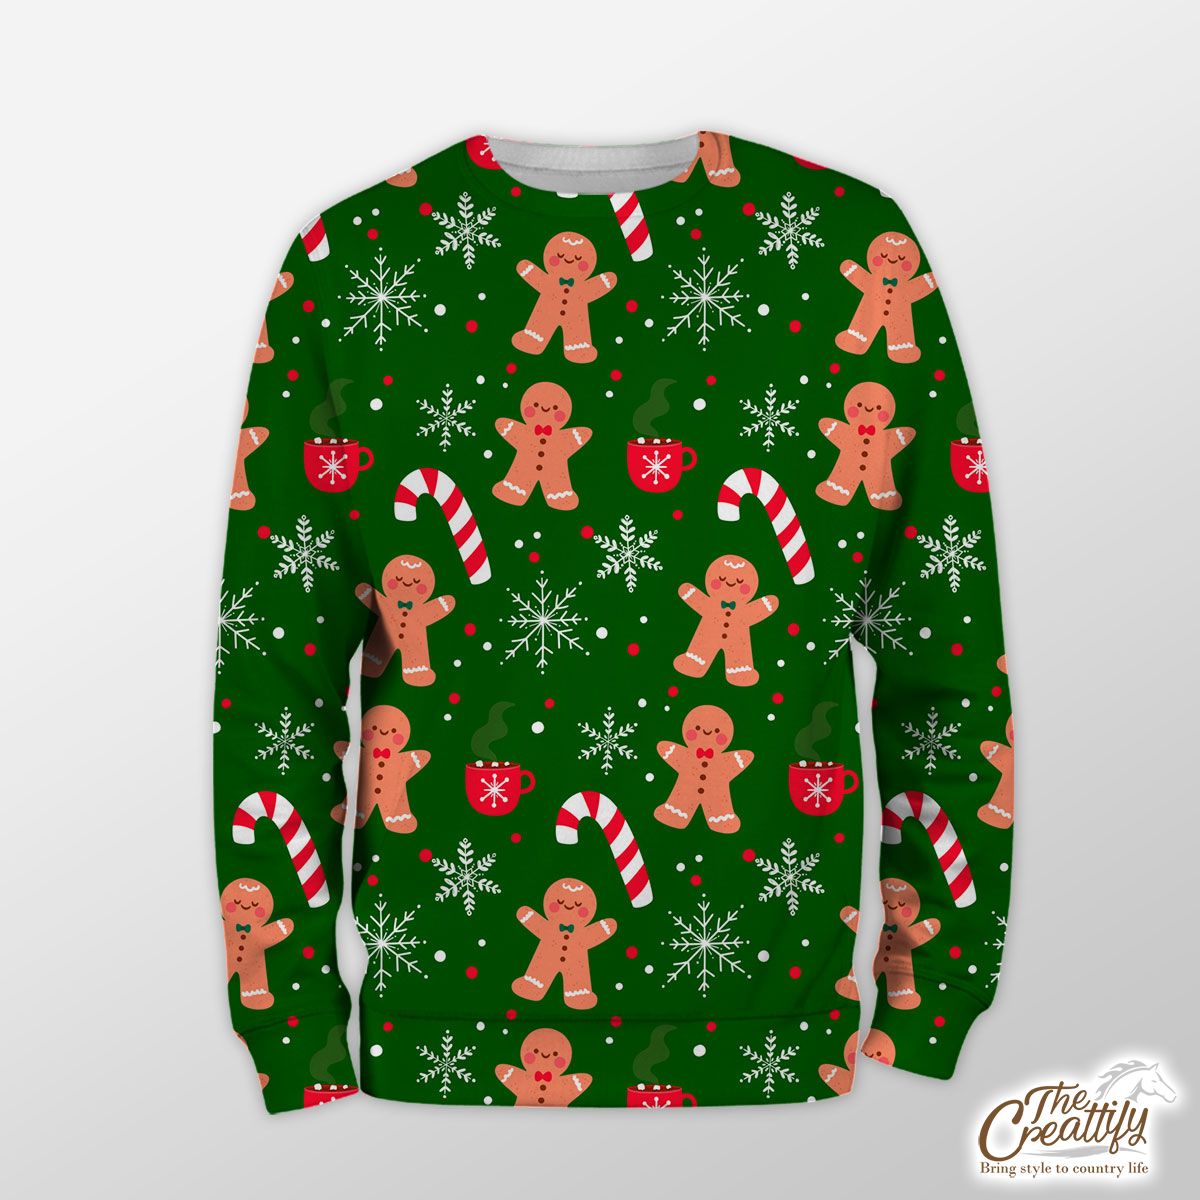 Red Green And White Gingerbread Man, Candy Cane With Snowflake Sweatshirt